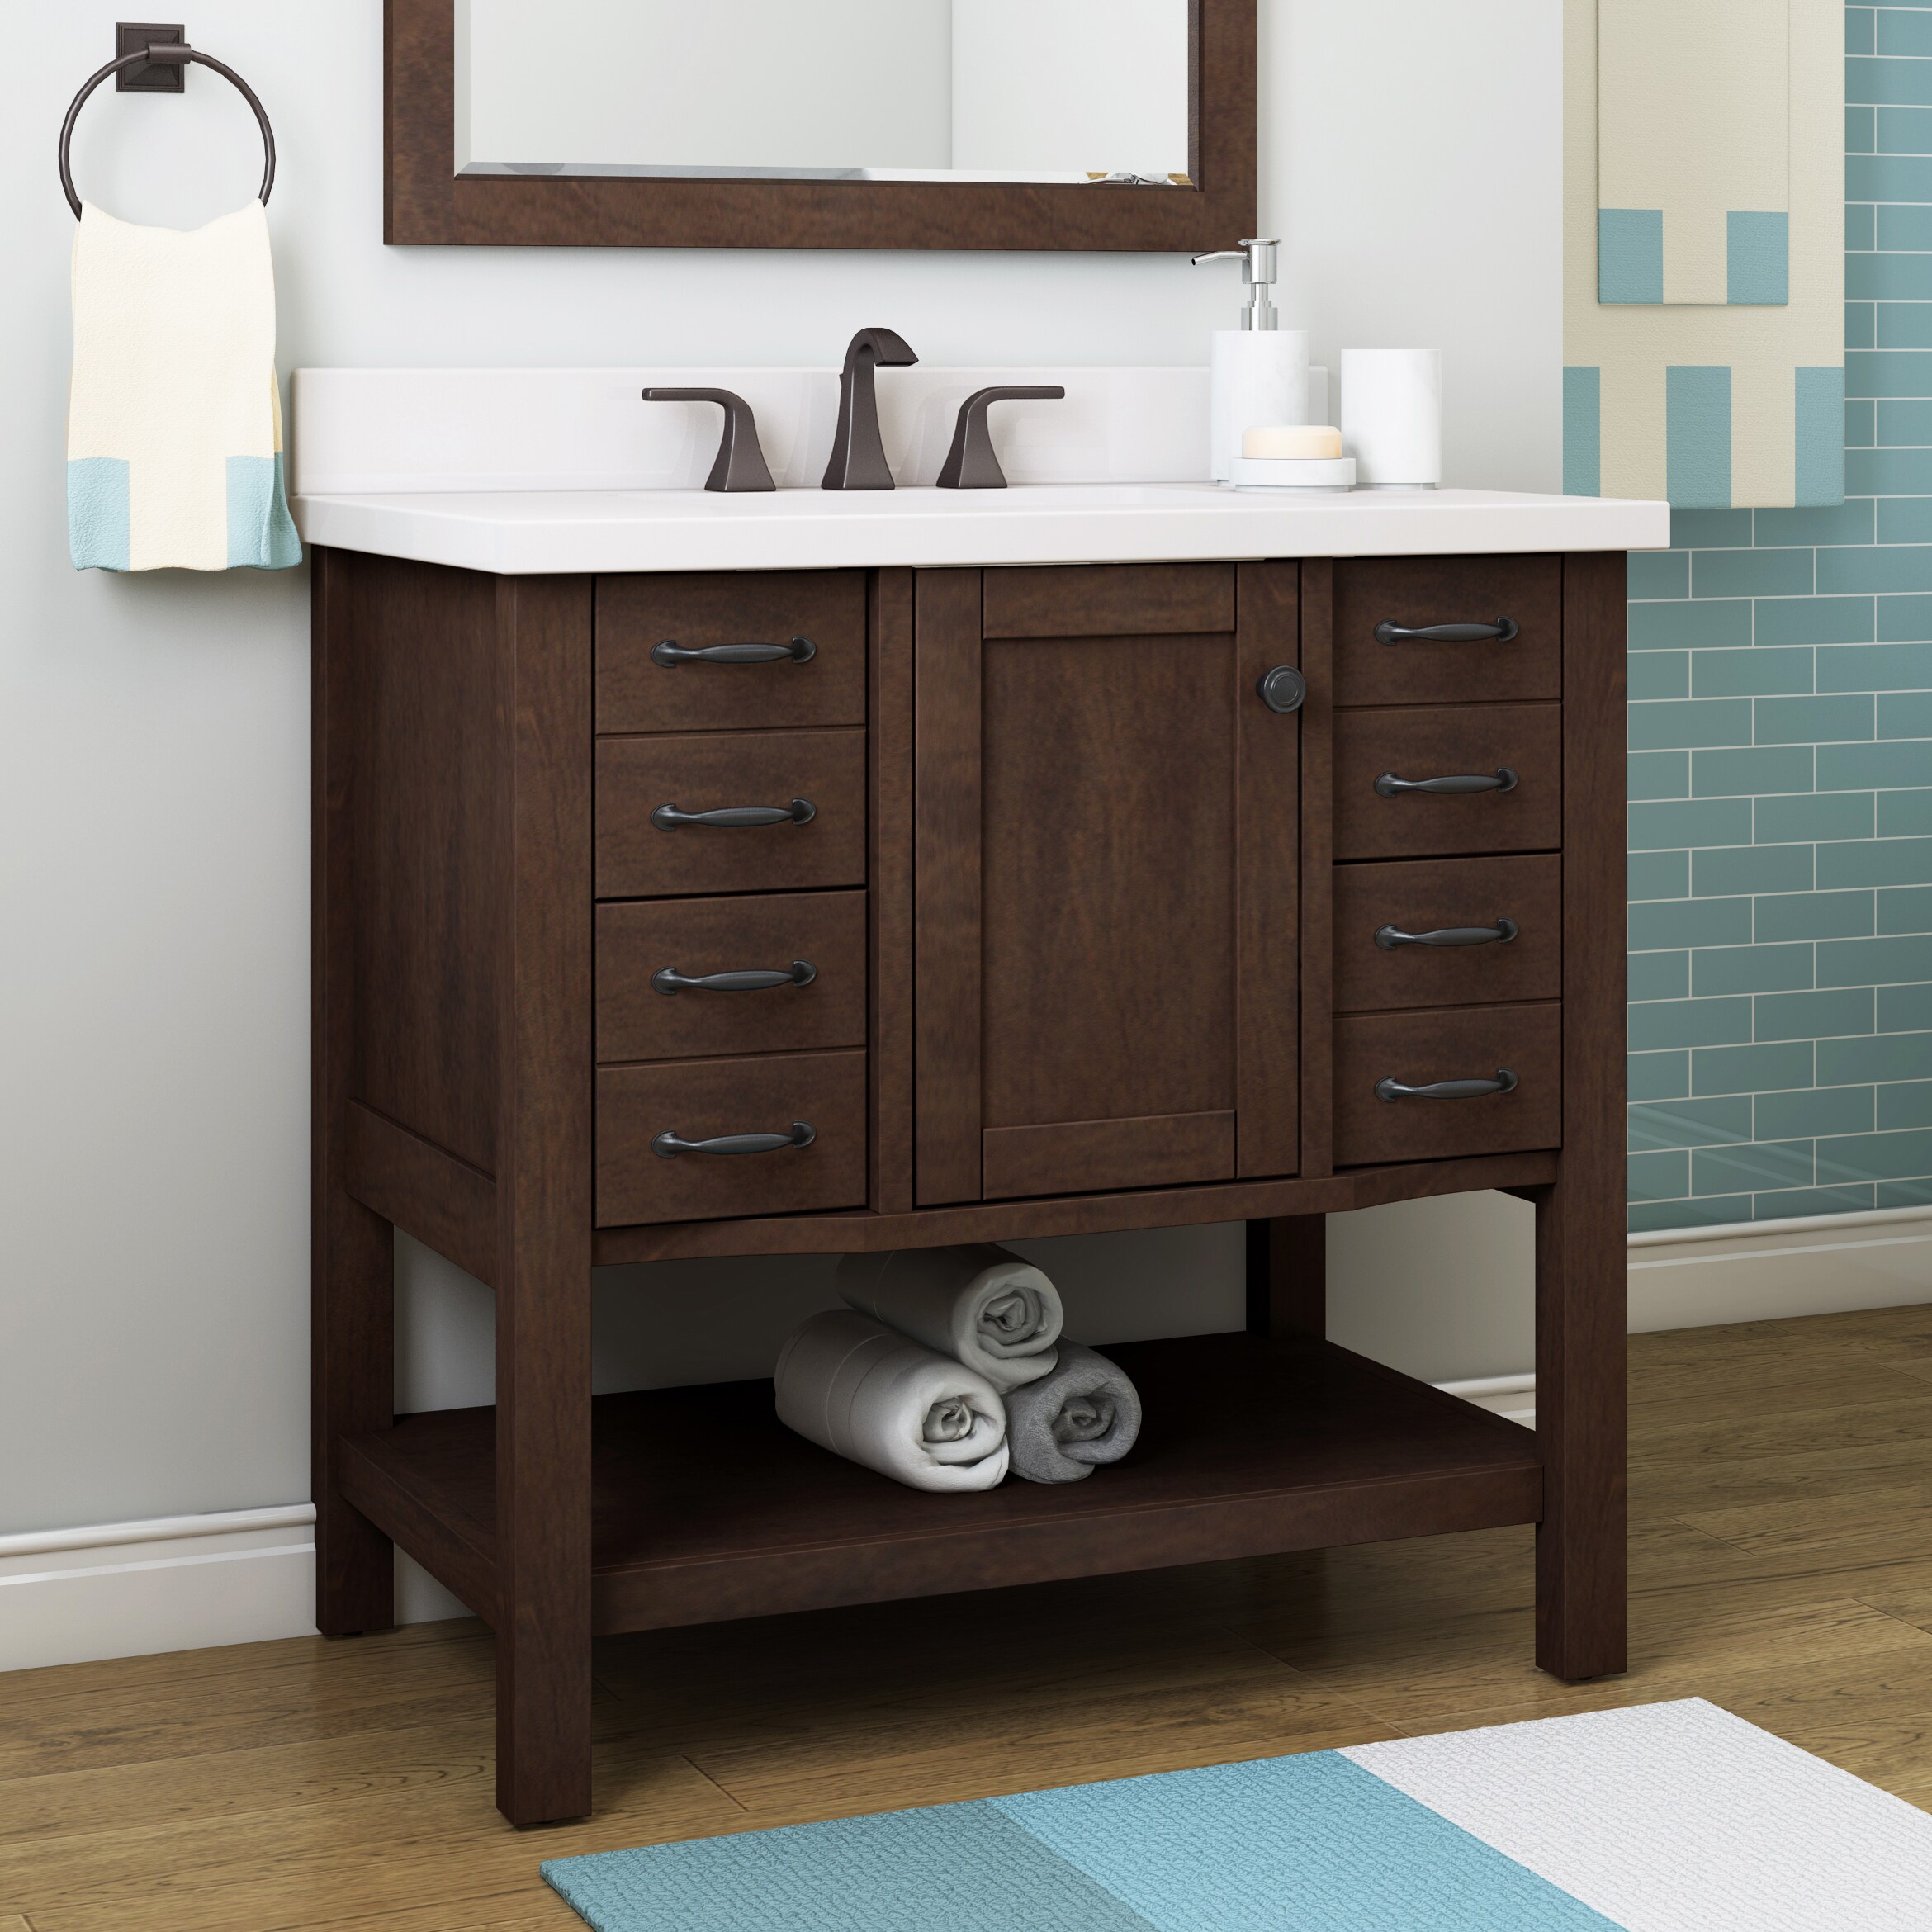 allen + roth Kingscote 36-in Espresso Undermount Single Sink Bathroom  Vanity with White Engineered Stone Top at